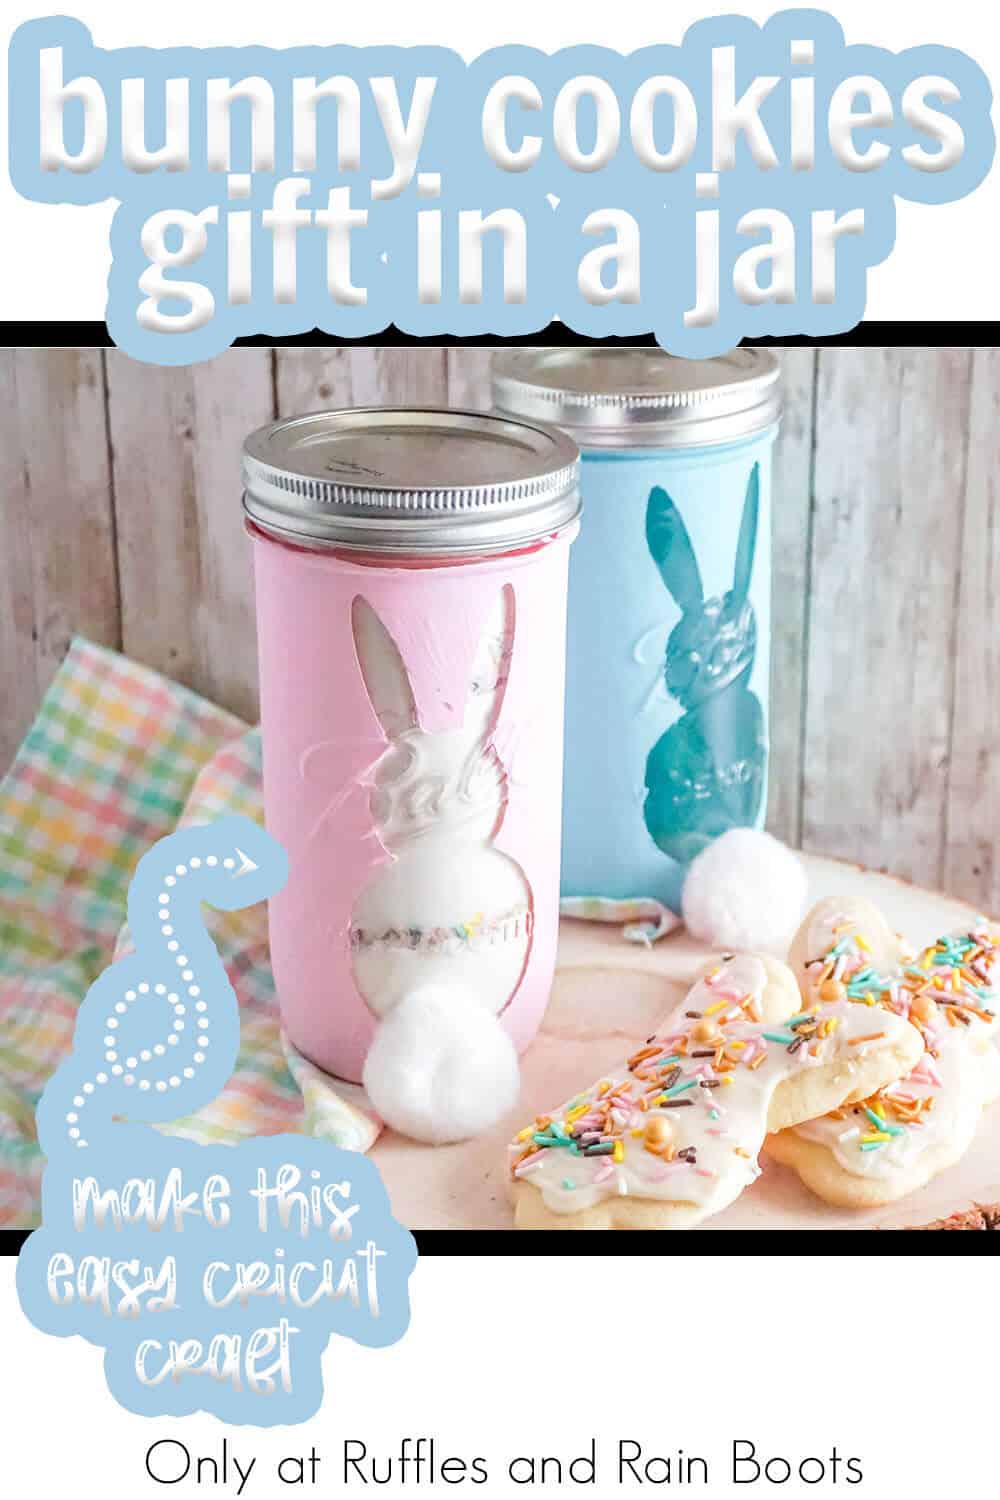 easter ding dong ditch gift idea mason jar gift in a jar cookie mix with text which reads bunny cookies gift in a jar make this easy cricut craft